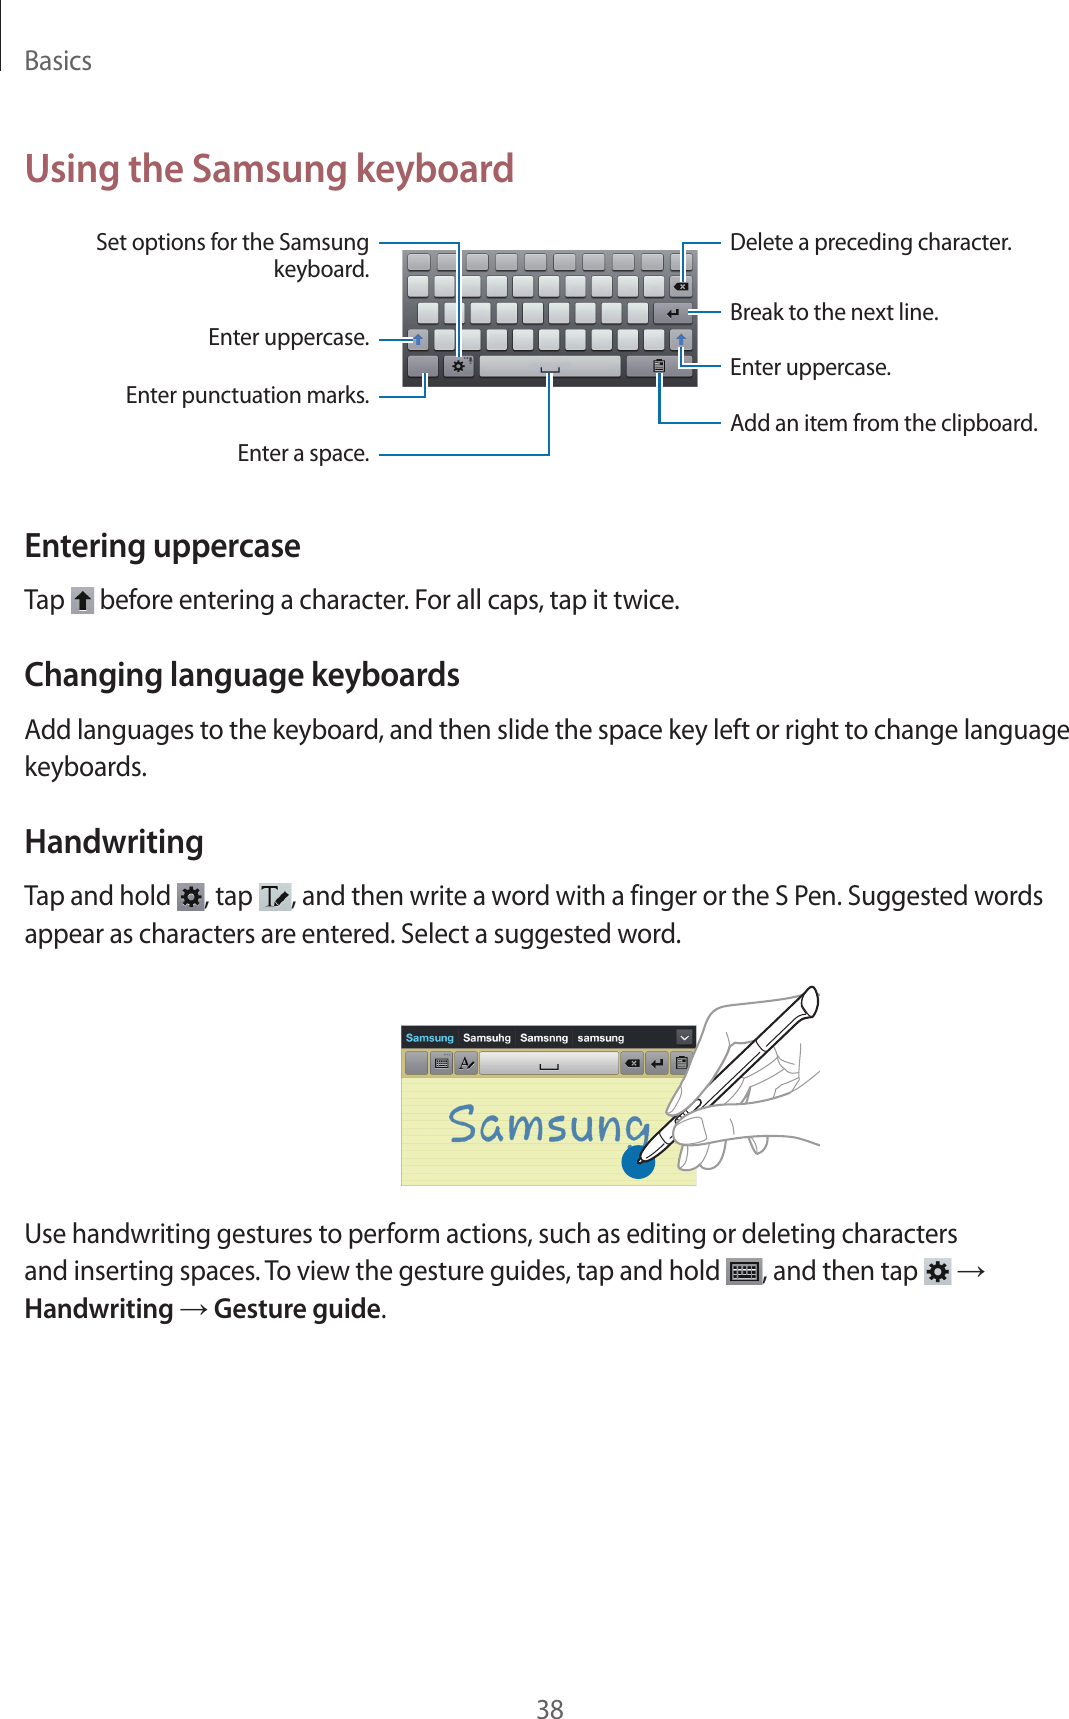 Basics38Using the Samsung keyboardBreak to the next line.Delete a preceding character.Enter punctuation marks.Enter uppercase.Set options for the Samsung keyboard.Enter a space.Enter uppercase.Add an item from the clipboard.Entering uppercaseTap   before entering a character. For all caps, tap it twice.Changing language keyboardsAdd languages to the keyboard, and then slide the space key left or right to change language keyboards.HandwritingTap and hold  , tap  , and then write a word with a finger or the S Pen. Suggested words appear as characters are entered. Select a suggested word.Use handwriting gestures to perform actions, such as editing or deleting characters and inserting spaces. To view the gesture guides, tap and hold  , and then tap   → Handwriting → Gesture guide.